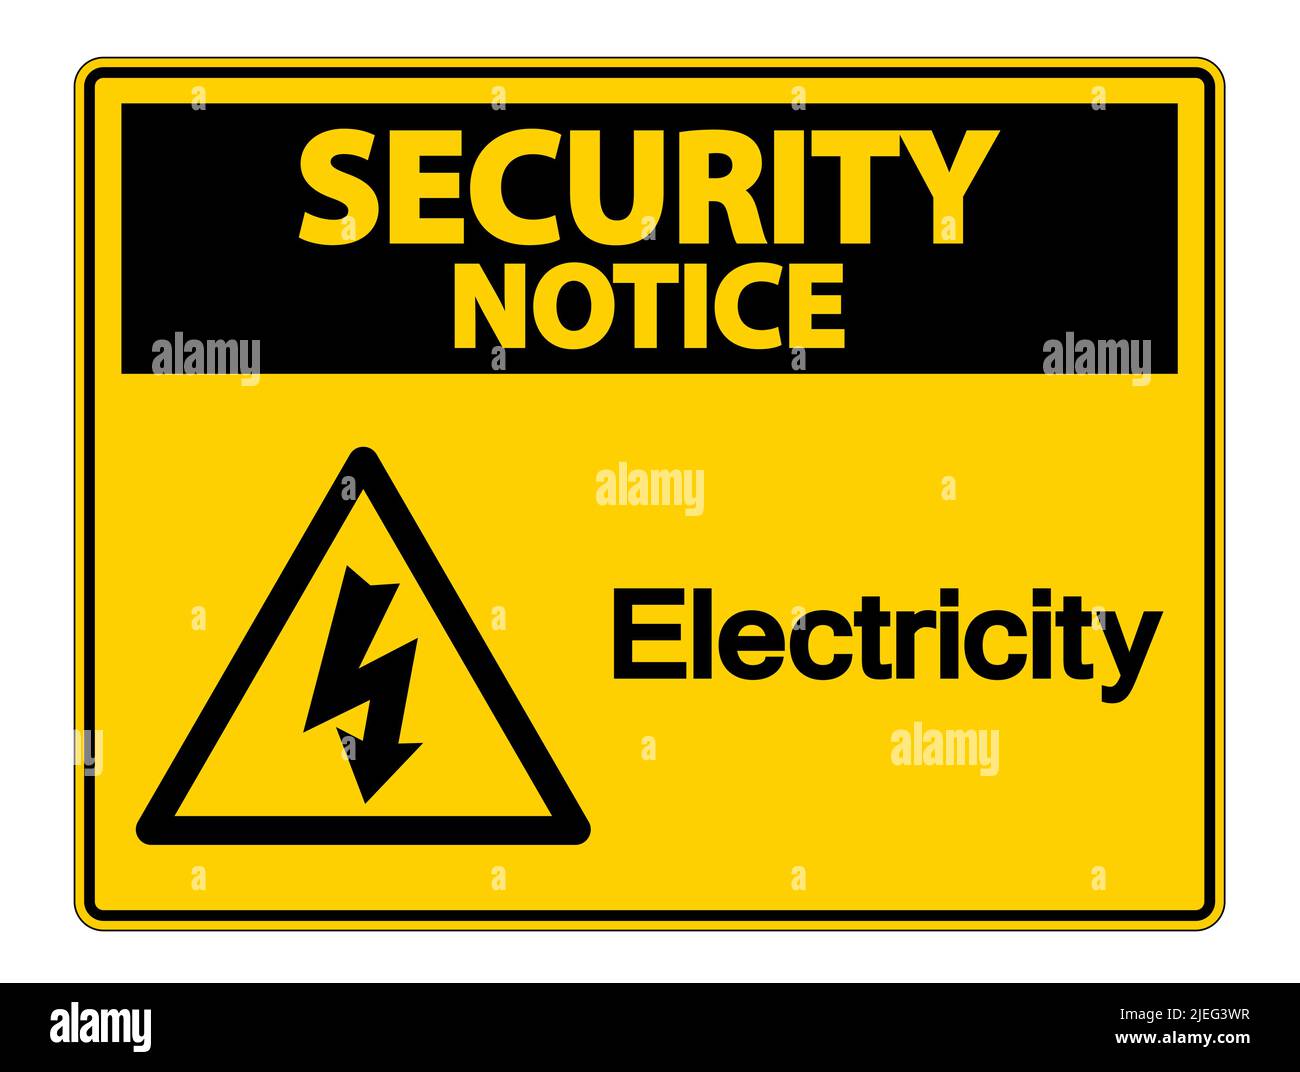 Security Notice Electricity Symbol Sign on white background,Vector Illustration Stock Vector